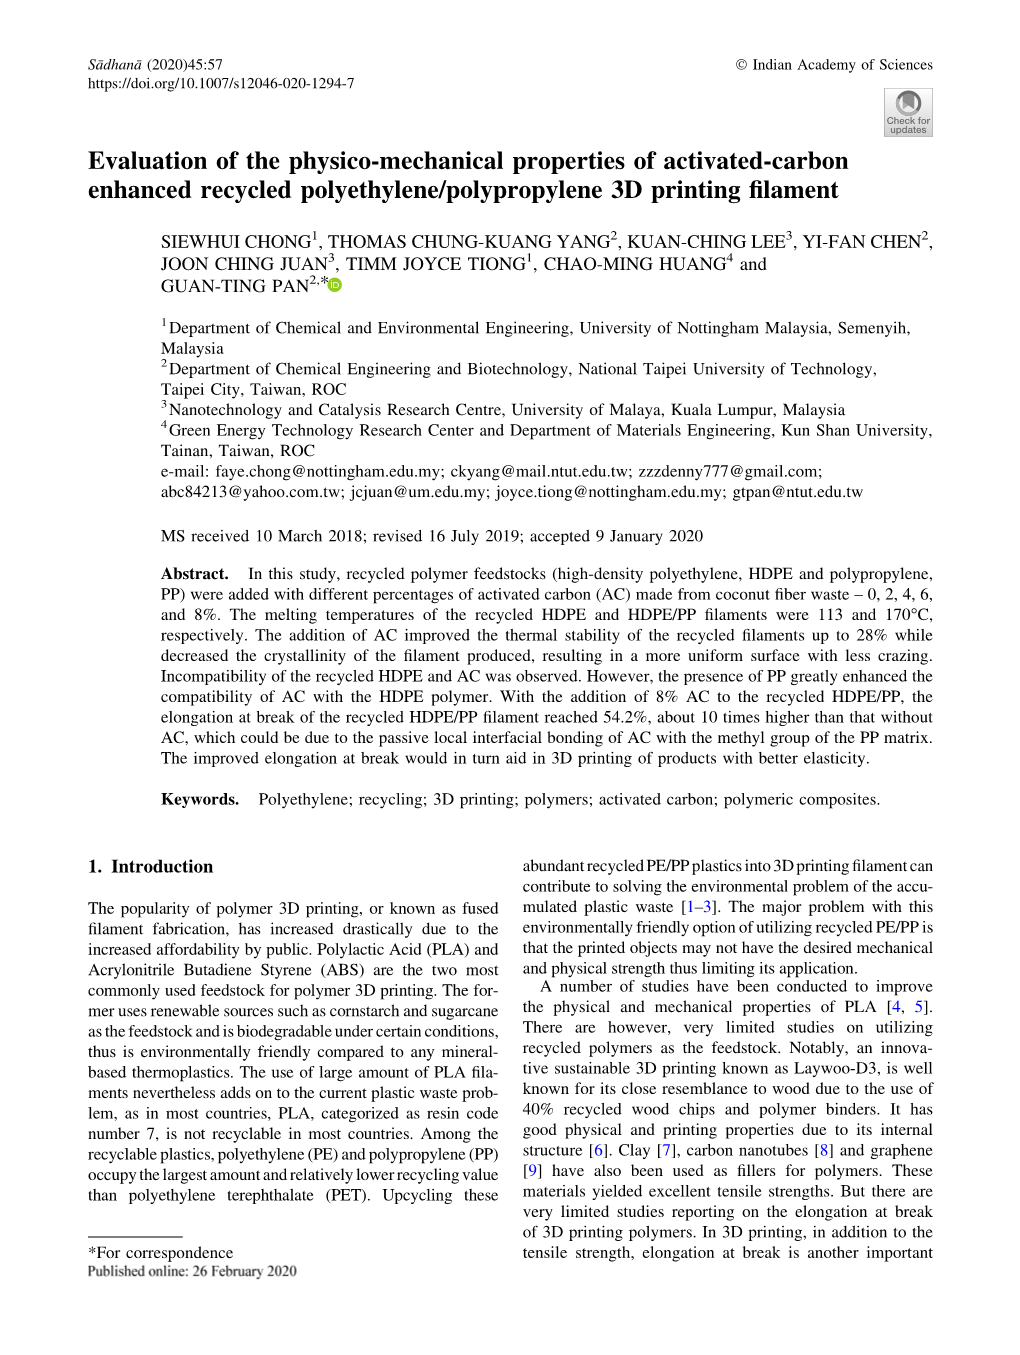 Evaluation of the Physico-Mechanical Properties of Activated-Carbon Enhanced Recycled Polyethylene/Polypropylene 3D Printing ﬁlament